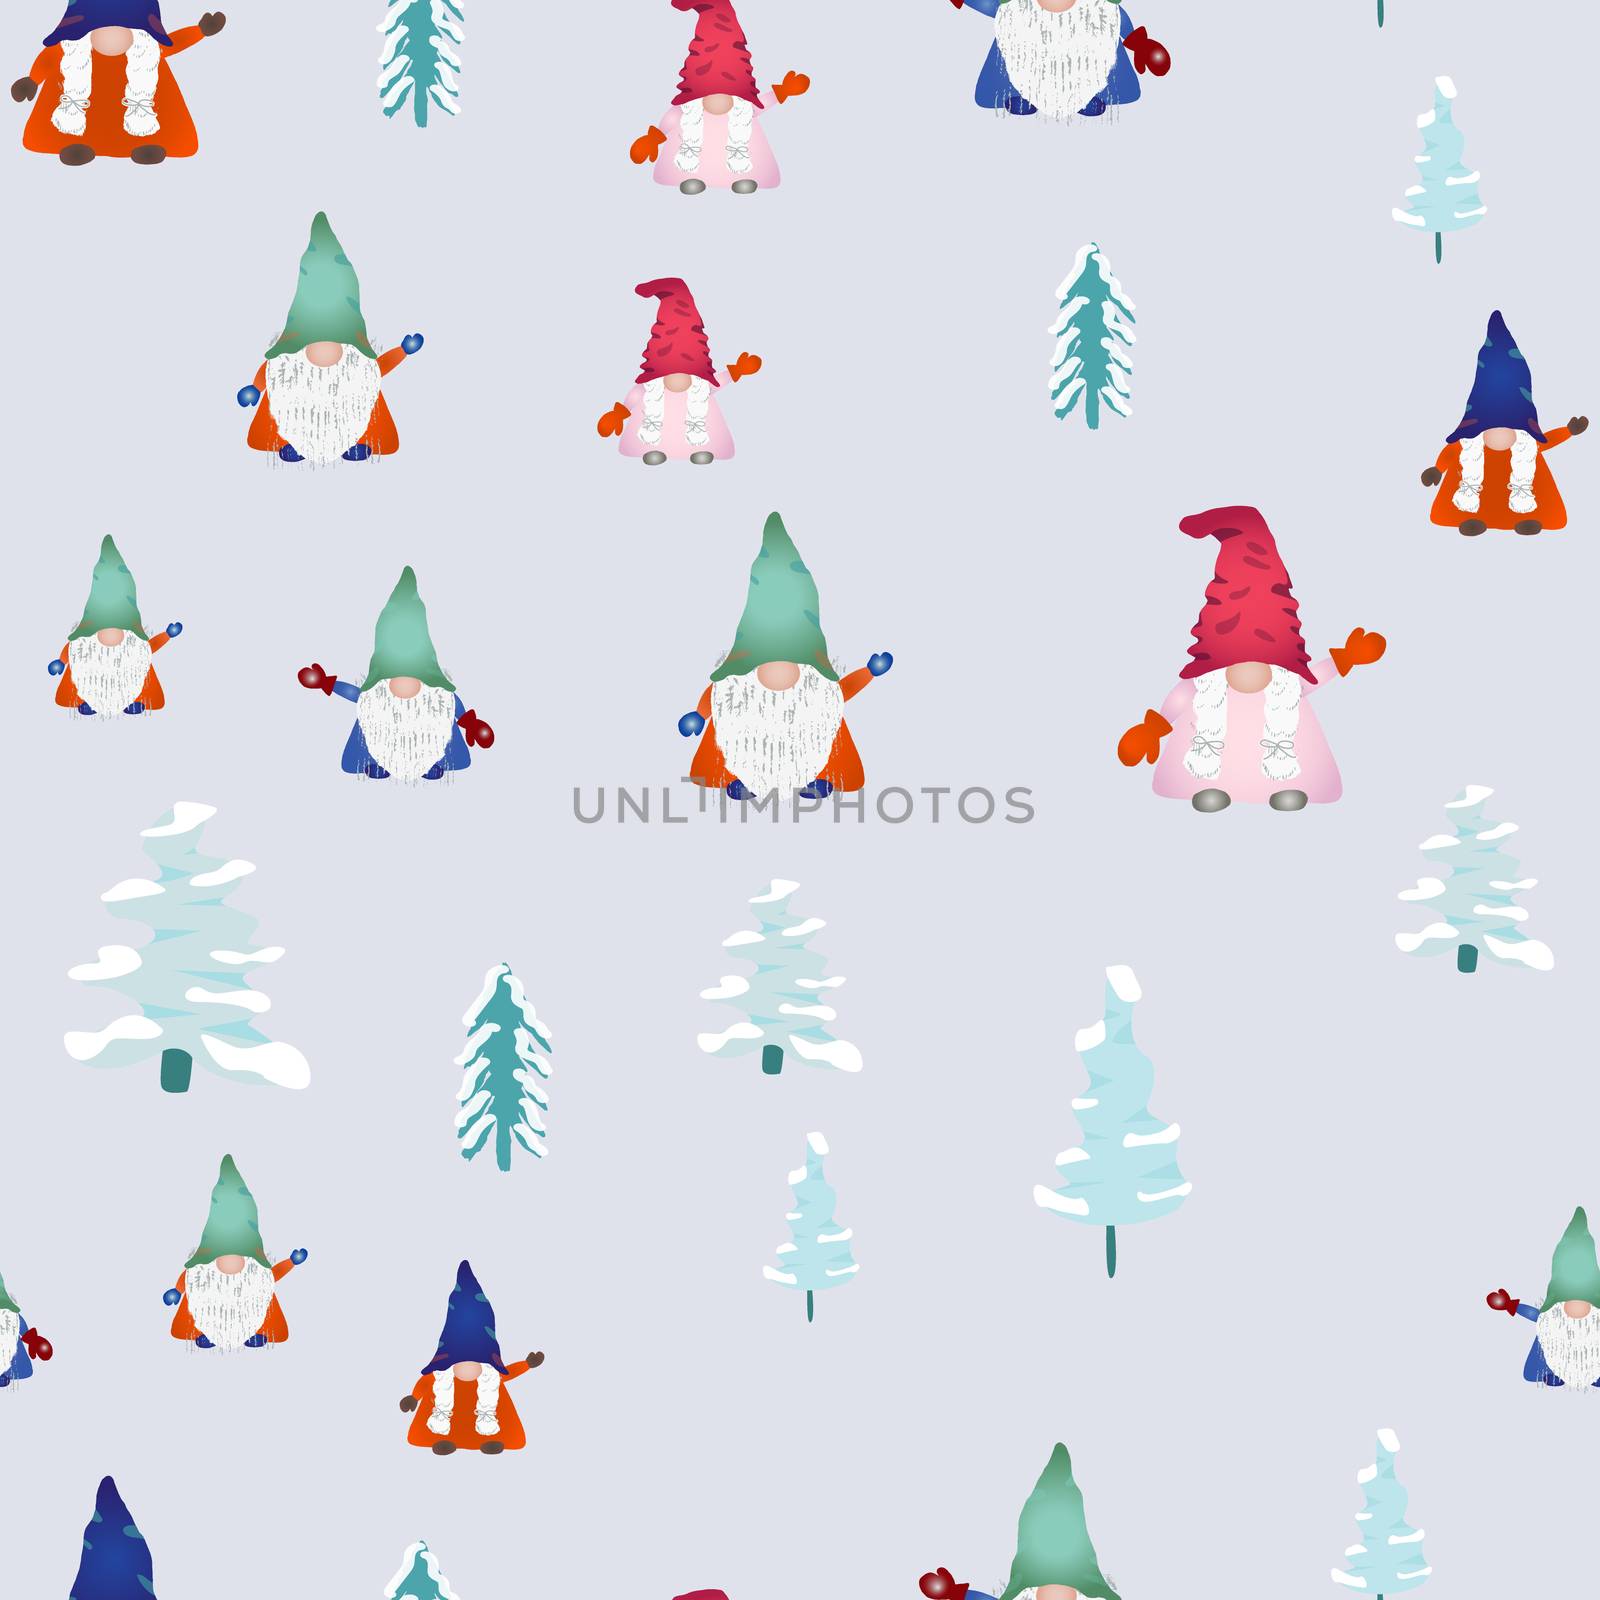 Christmas scandinavian gnomes seamless pattern on light blue. Winter landscape, pine trees and dwarf or elf fairytale characters. Wallpaper, textile, wrapping paper design. Vector illustration.